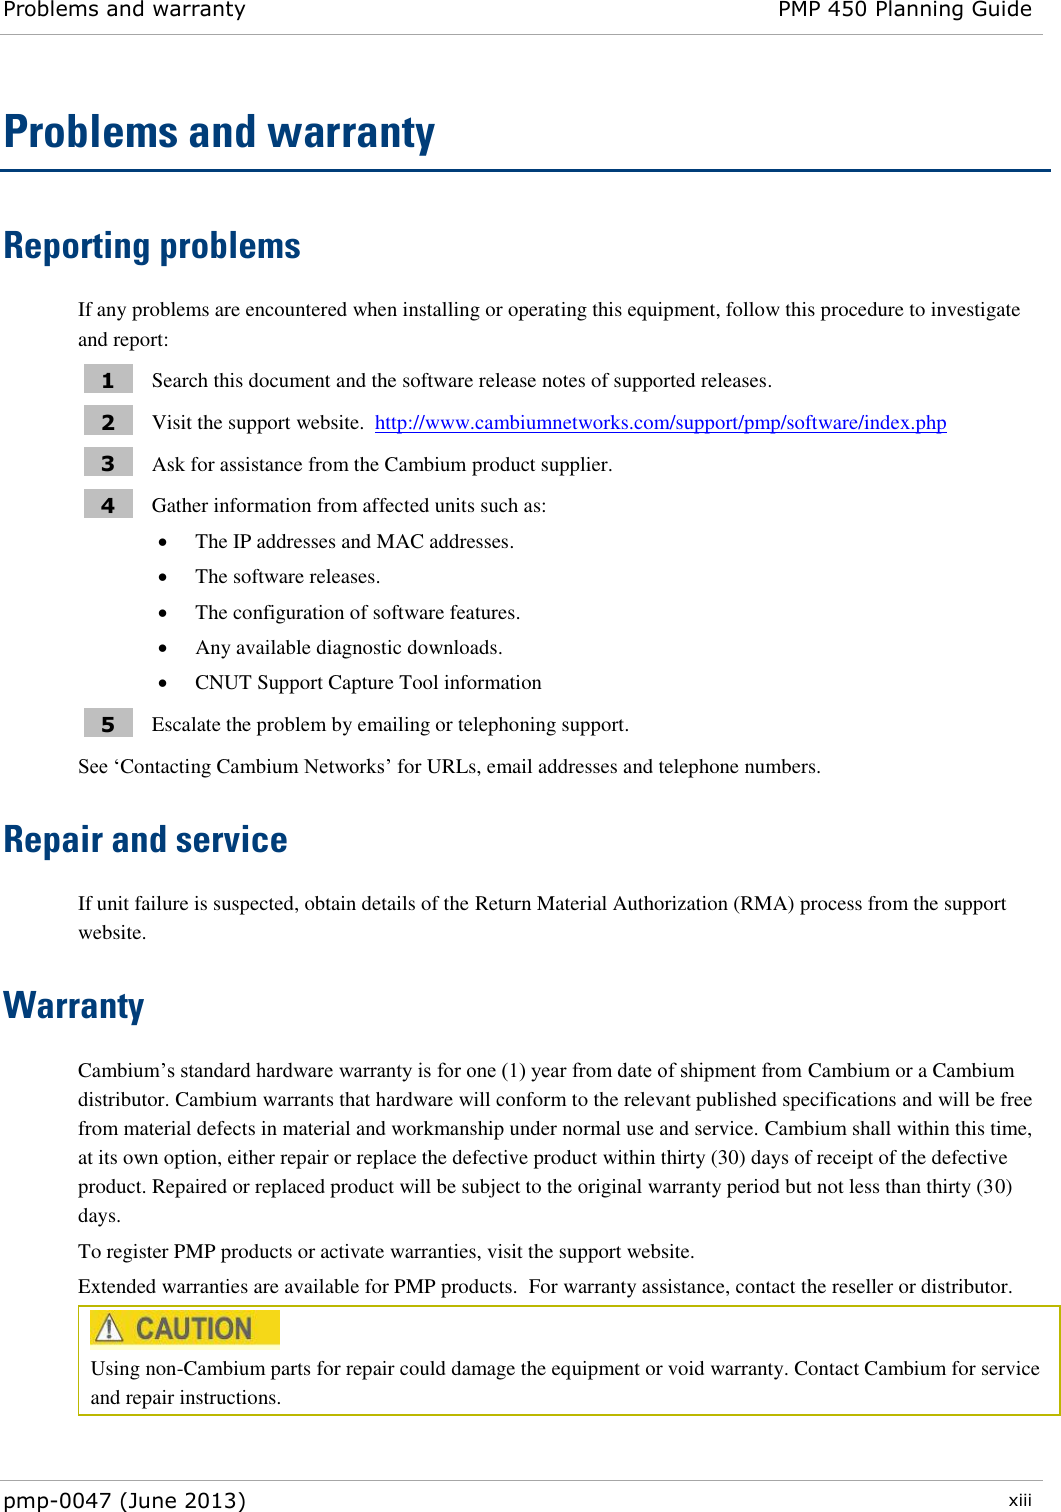 Problems and warranty PMP 450 Planning Guide  pmp-0047 (June 2013)  xiii  Problems and warranty Reporting problems If any problems are encountered when installing or operating this equipment, follow this procedure to investigate and report: 1 Search this document and the software release notes of supported releases. 2 Visit the support website.  http://www.cambiumnetworks.com/support/pmp/software/index.php  3 Ask for assistance from the Cambium product supplier. 4 Gather information from affected units such as:  The IP addresses and MAC addresses.  The software releases.  The configuration of software features.  Any available diagnostic downloads.  CNUT Support Capture Tool information 5 Escalate the problem by emailing or telephoning support. See ‘Contacting Cambium Networks’ for URLs, email addresses and telephone numbers. Repair and service If unit failure is suspected, obtain details of the Return Material Authorization (RMA) process from the support website. Warranty Cambium’s standard hardware warranty is for one (1) year from date of shipment from Cambium or a Cambium distributor. Cambium warrants that hardware will conform to the relevant published specifications and will be free from material defects in material and workmanship under normal use and service. Cambium shall within this time, at its own option, either repair or replace the defective product within thirty (30) days of receipt of the defective product. Repaired or replaced product will be subject to the original warranty period but not less than thirty (30) days. To register PMP products or activate warranties, visit the support website. Extended warranties are available for PMP products.  For warranty assistance, contact the reseller or distributor.  Using non-Cambium parts for repair could damage the equipment or void warranty. Contact Cambium for service and repair instructions.  